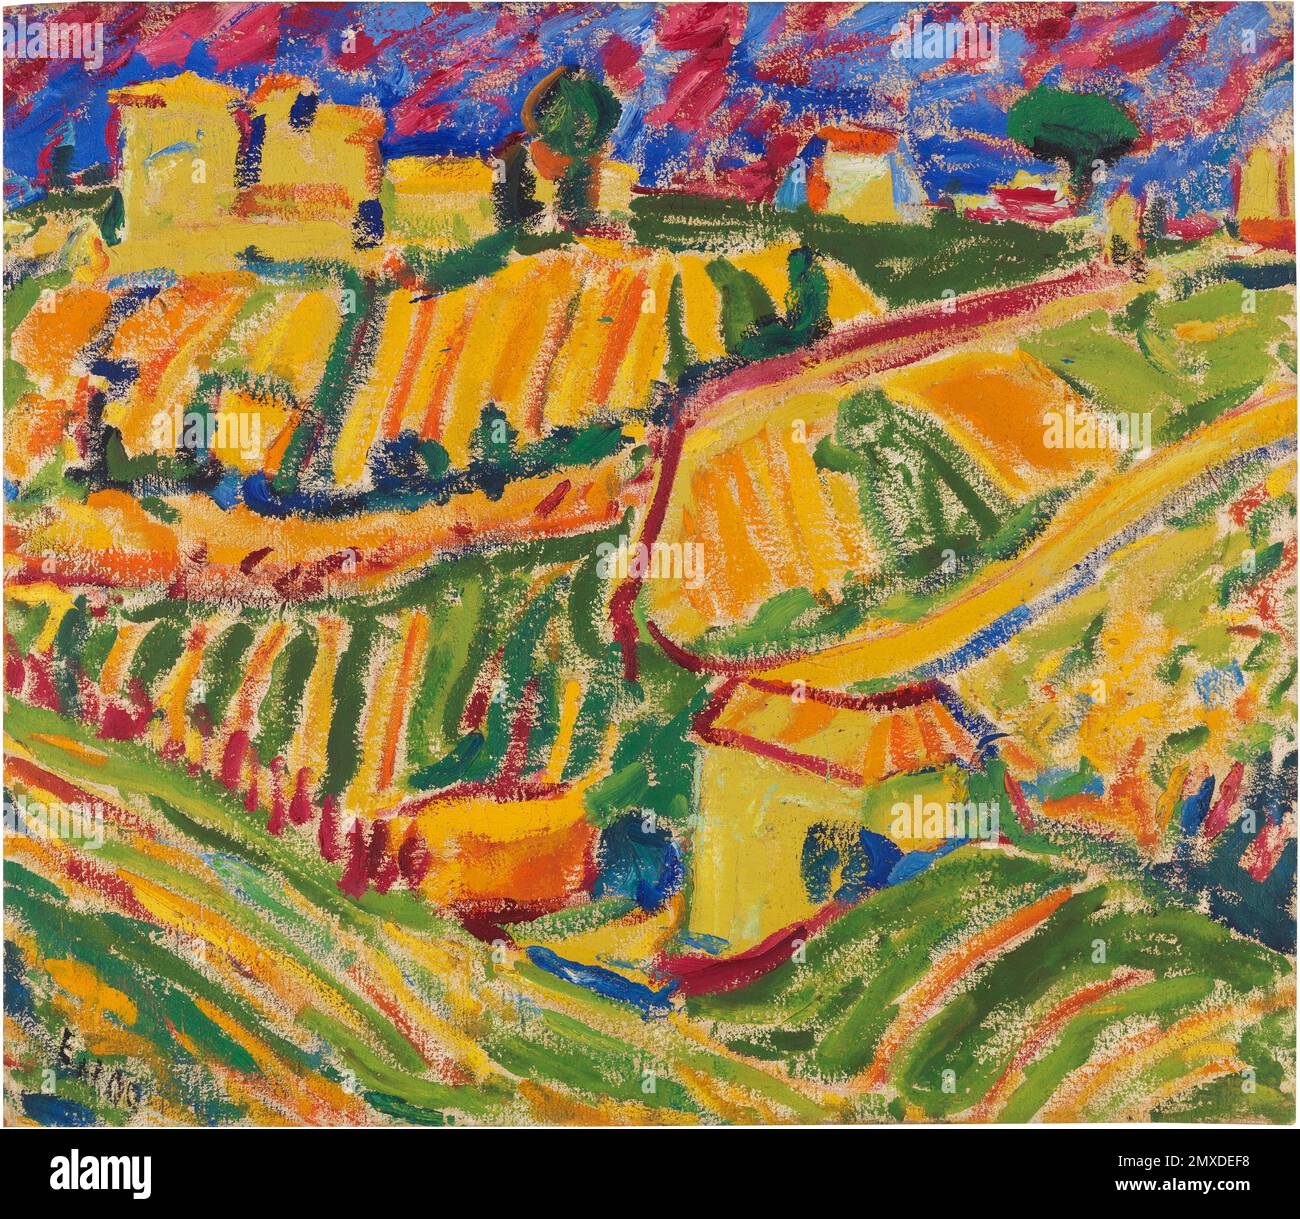 Landscape near Rome. Museum: PRIVATE COLLECTION. Author: ERICH HECKEL. Stock Photo